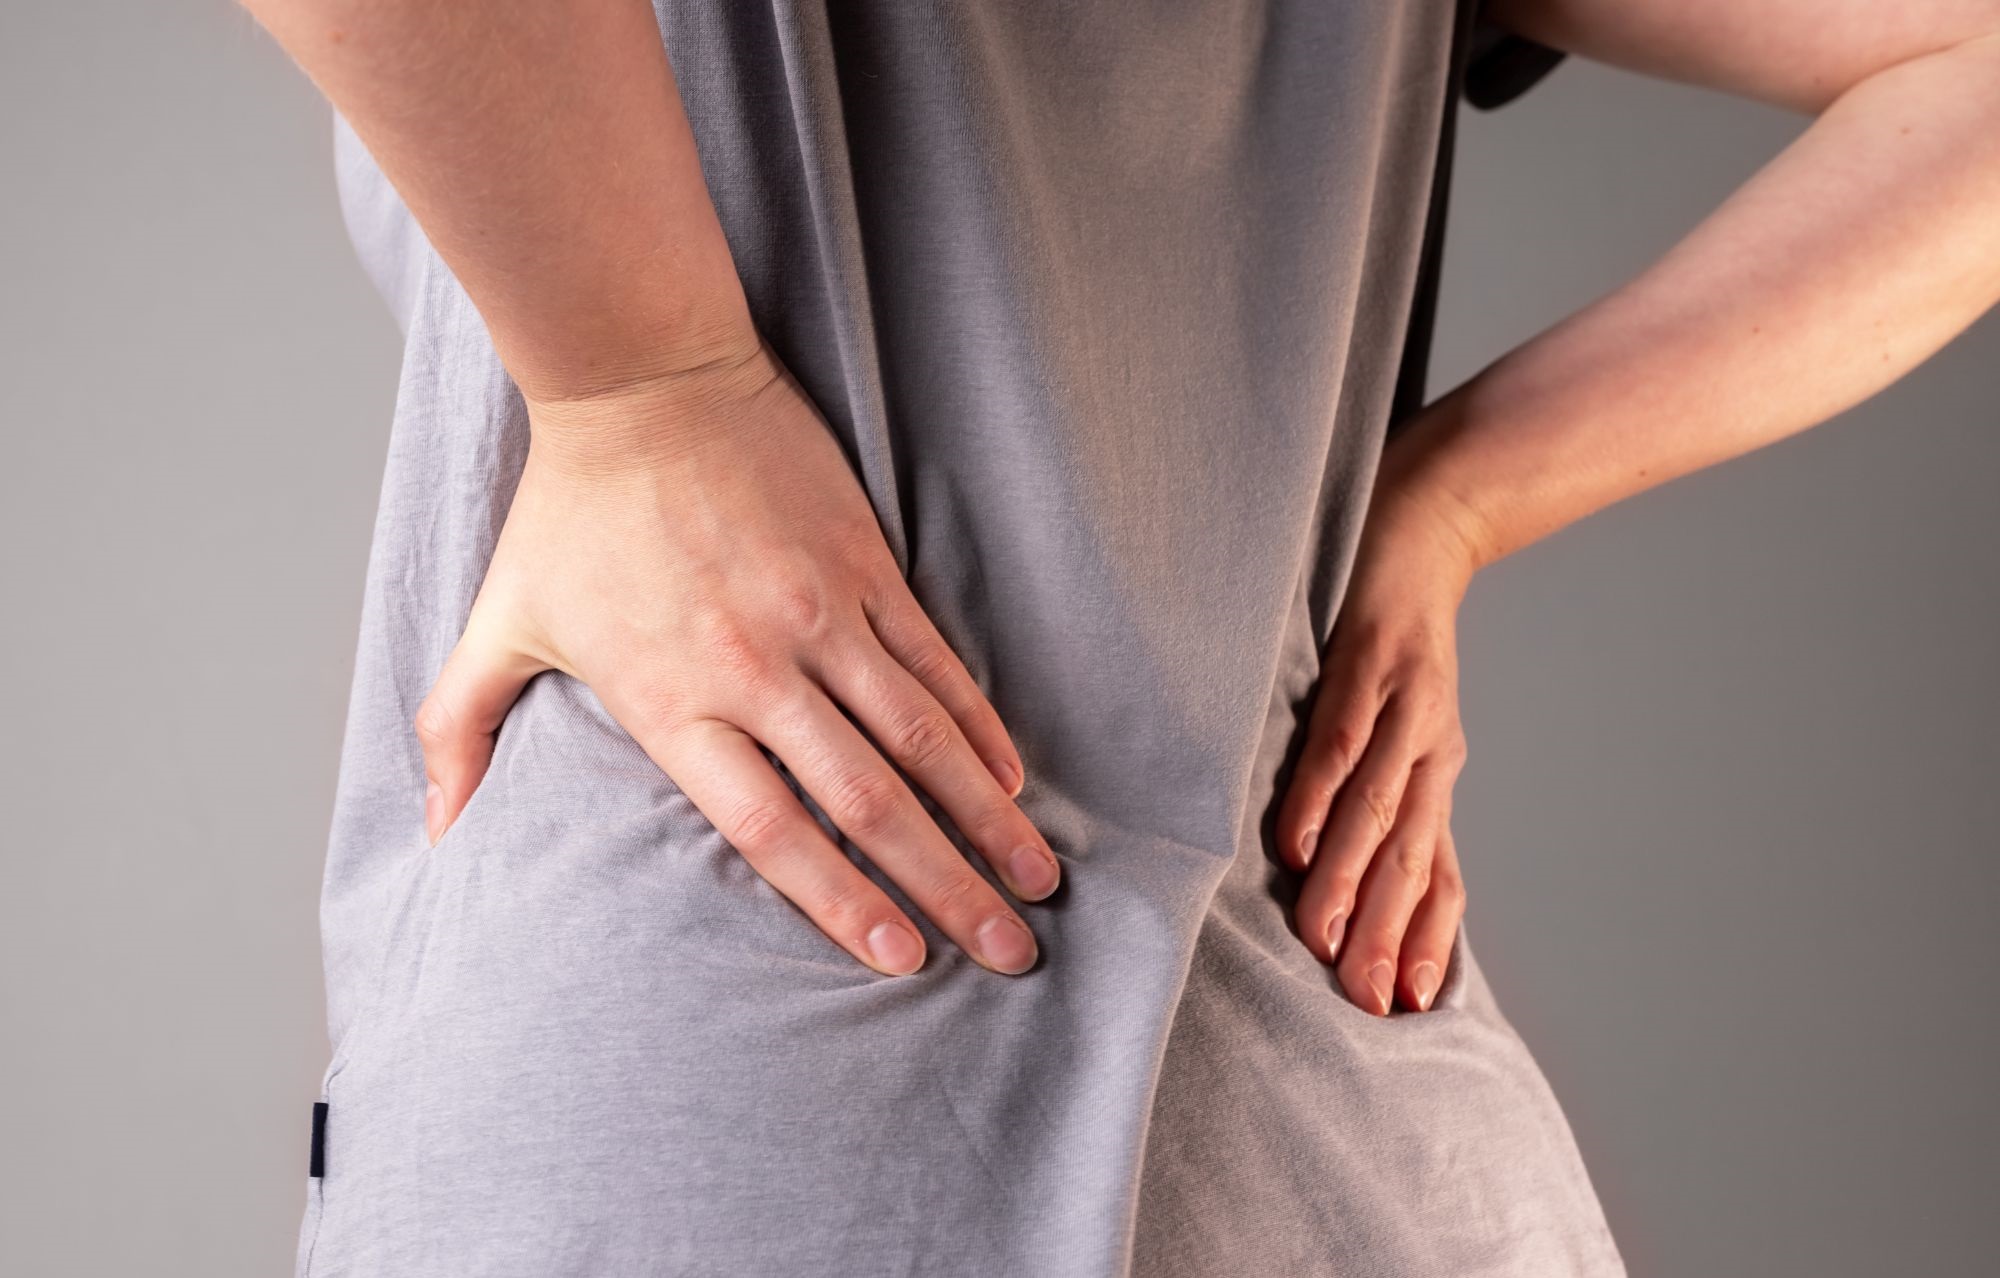 Female-Lower-Back-Pain-quniue-causes-of-lower-back-pain